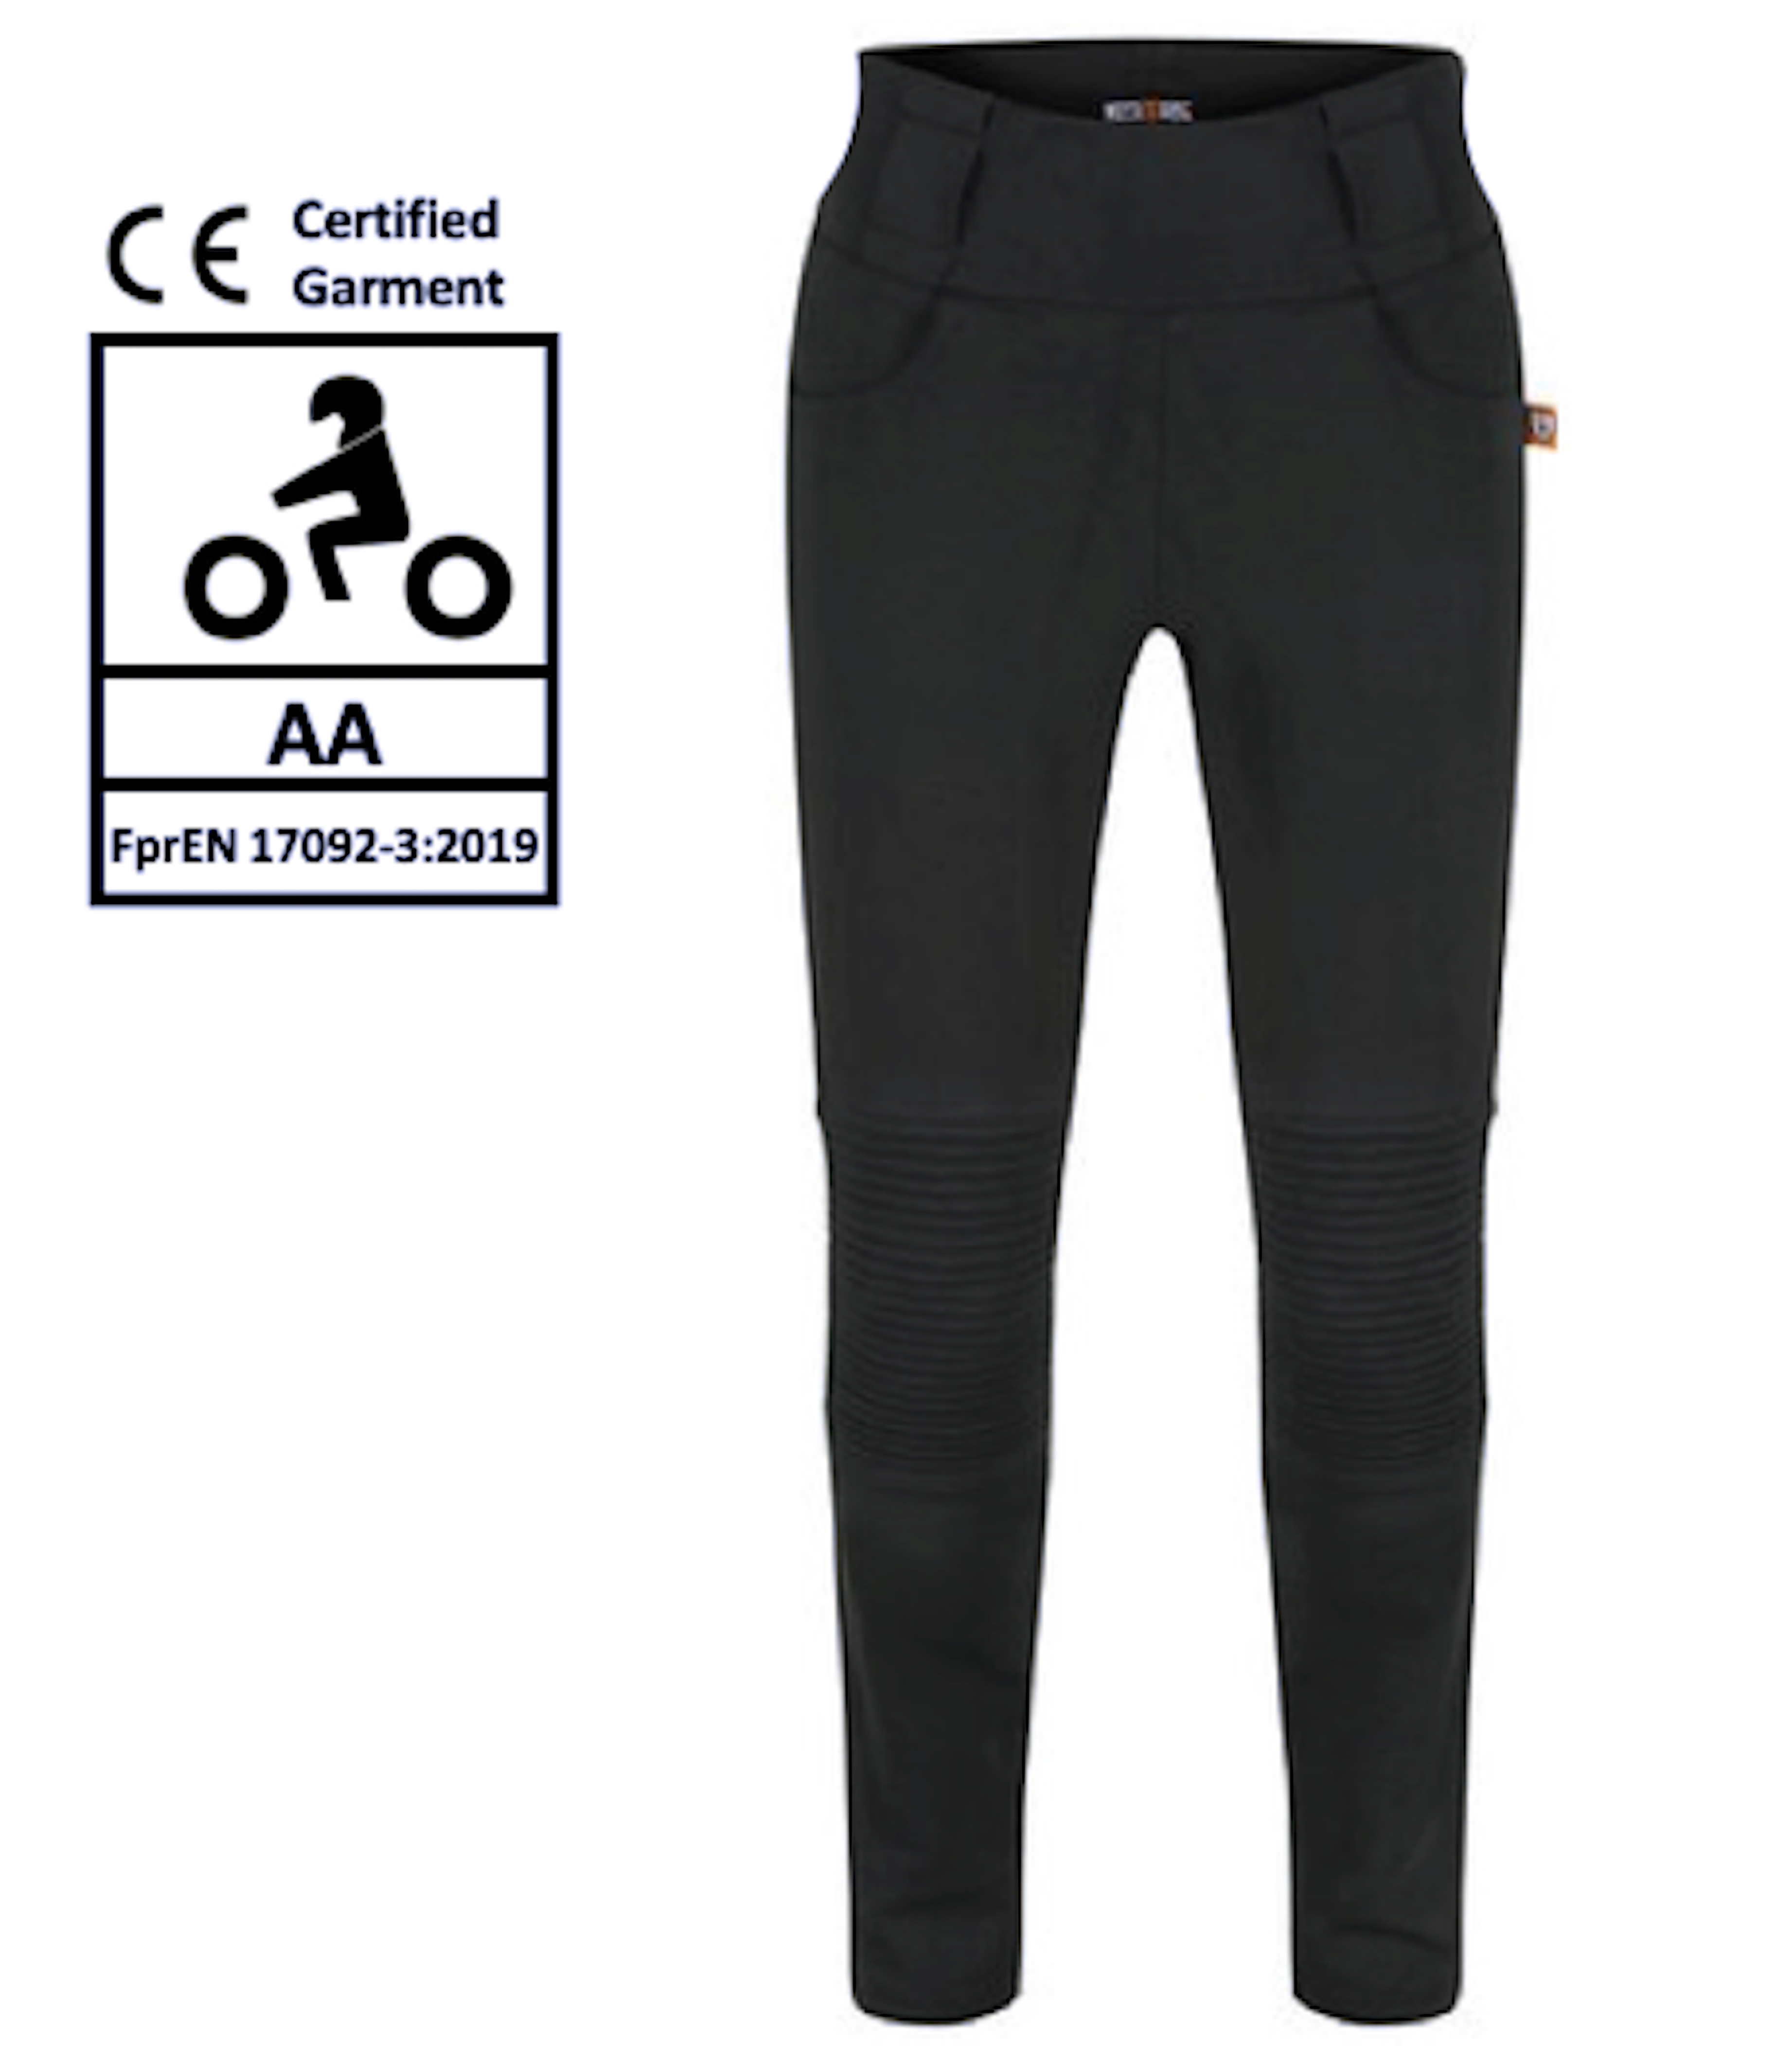 black women&#39;s motorcycle ribbed knee design leggings  from MotoGirl from the front with certification details